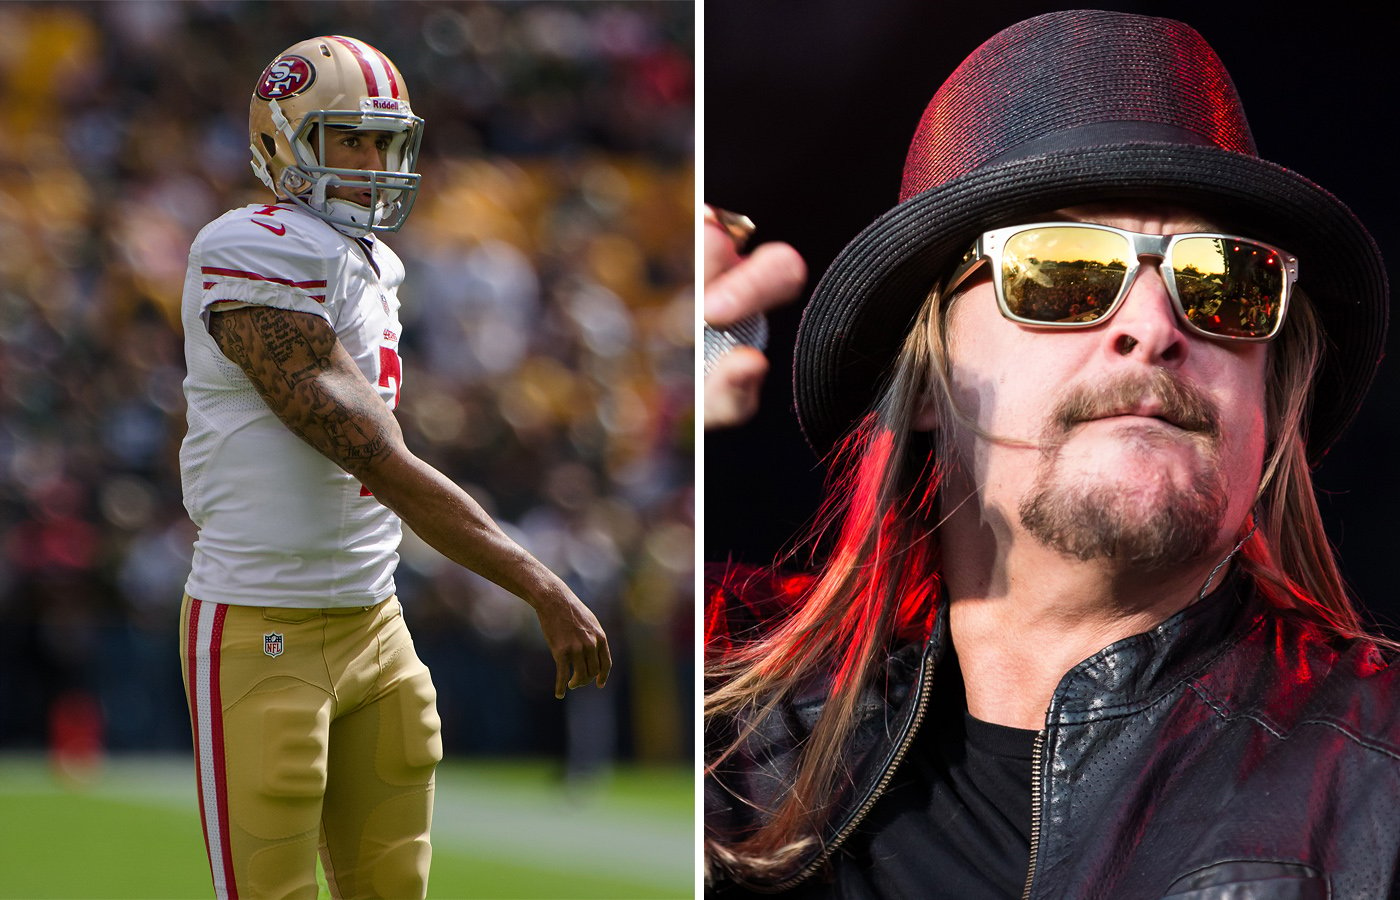 Right: Colin Kaepernick. Photo credit: Mike Morbeck. Right: Kid Rock. Photo credit: Chelsea Lauren Photography